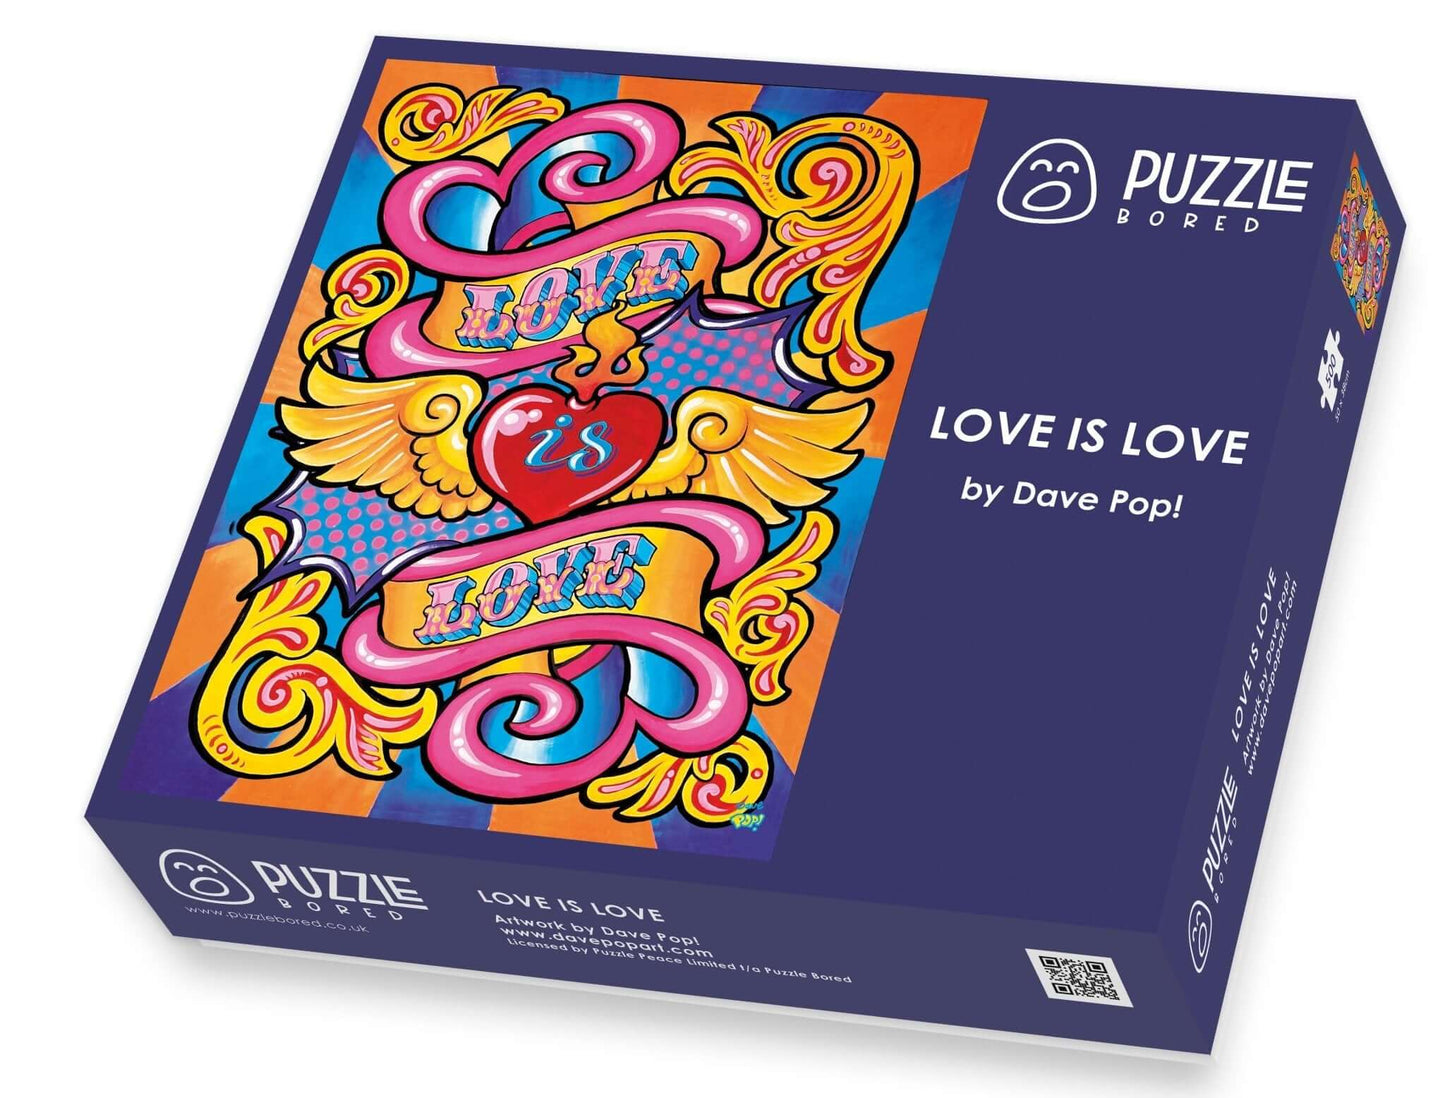 Love is Love by Dave Pop! - Puzzle Bored